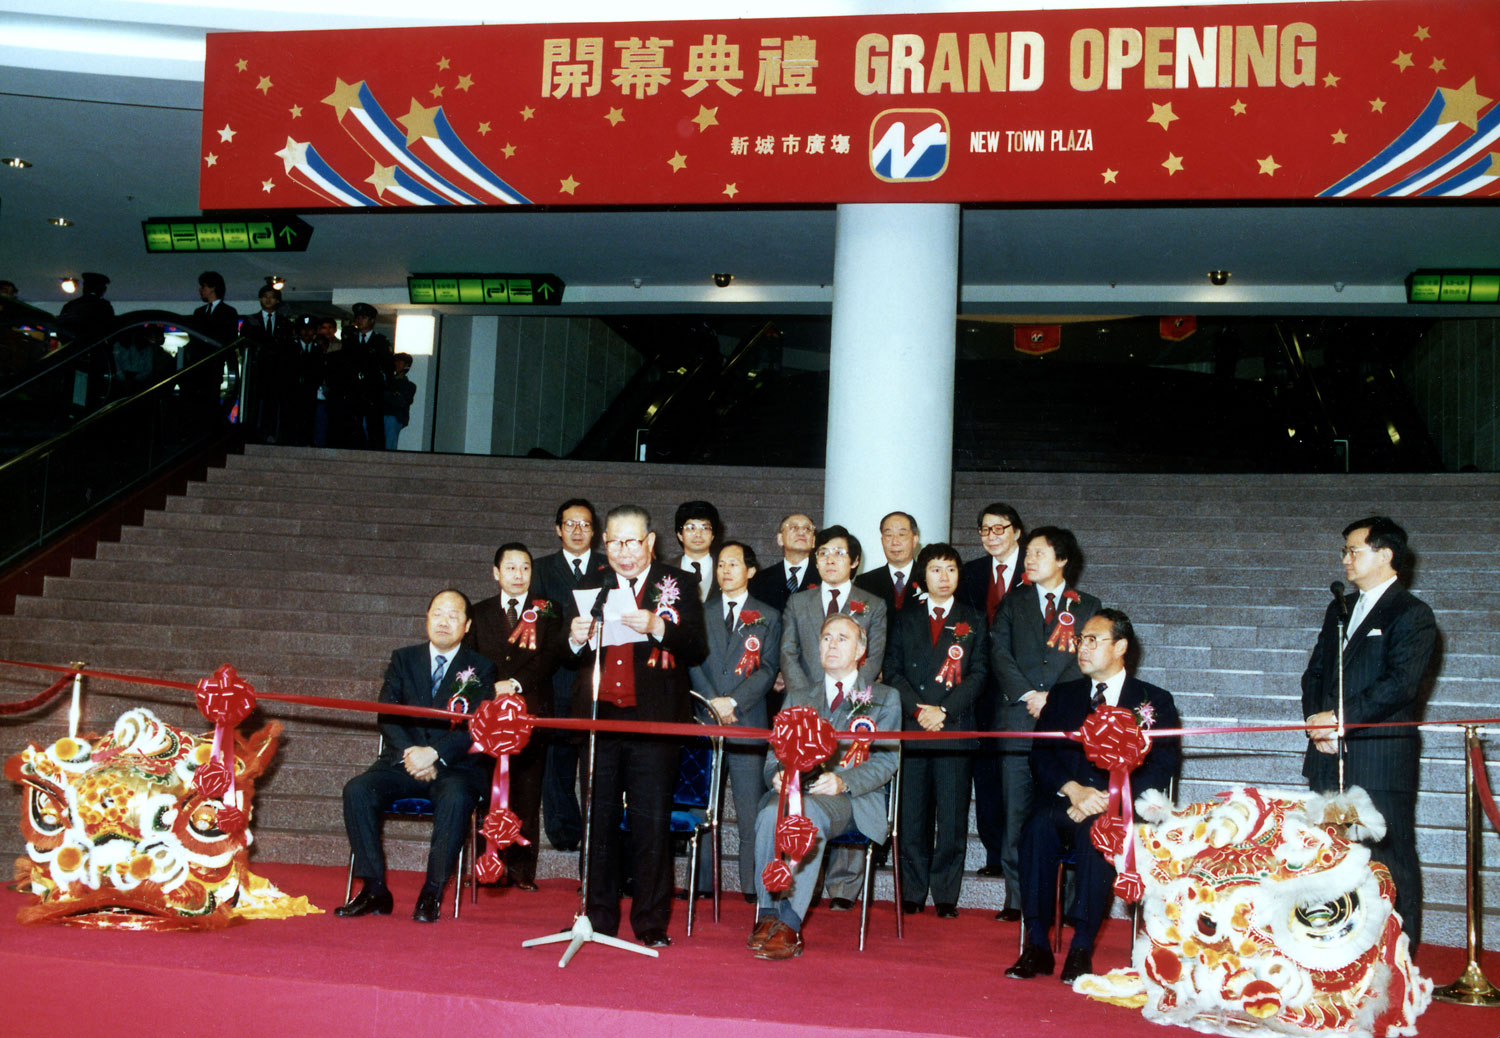 Opens New Town Plaza in Sha Tin